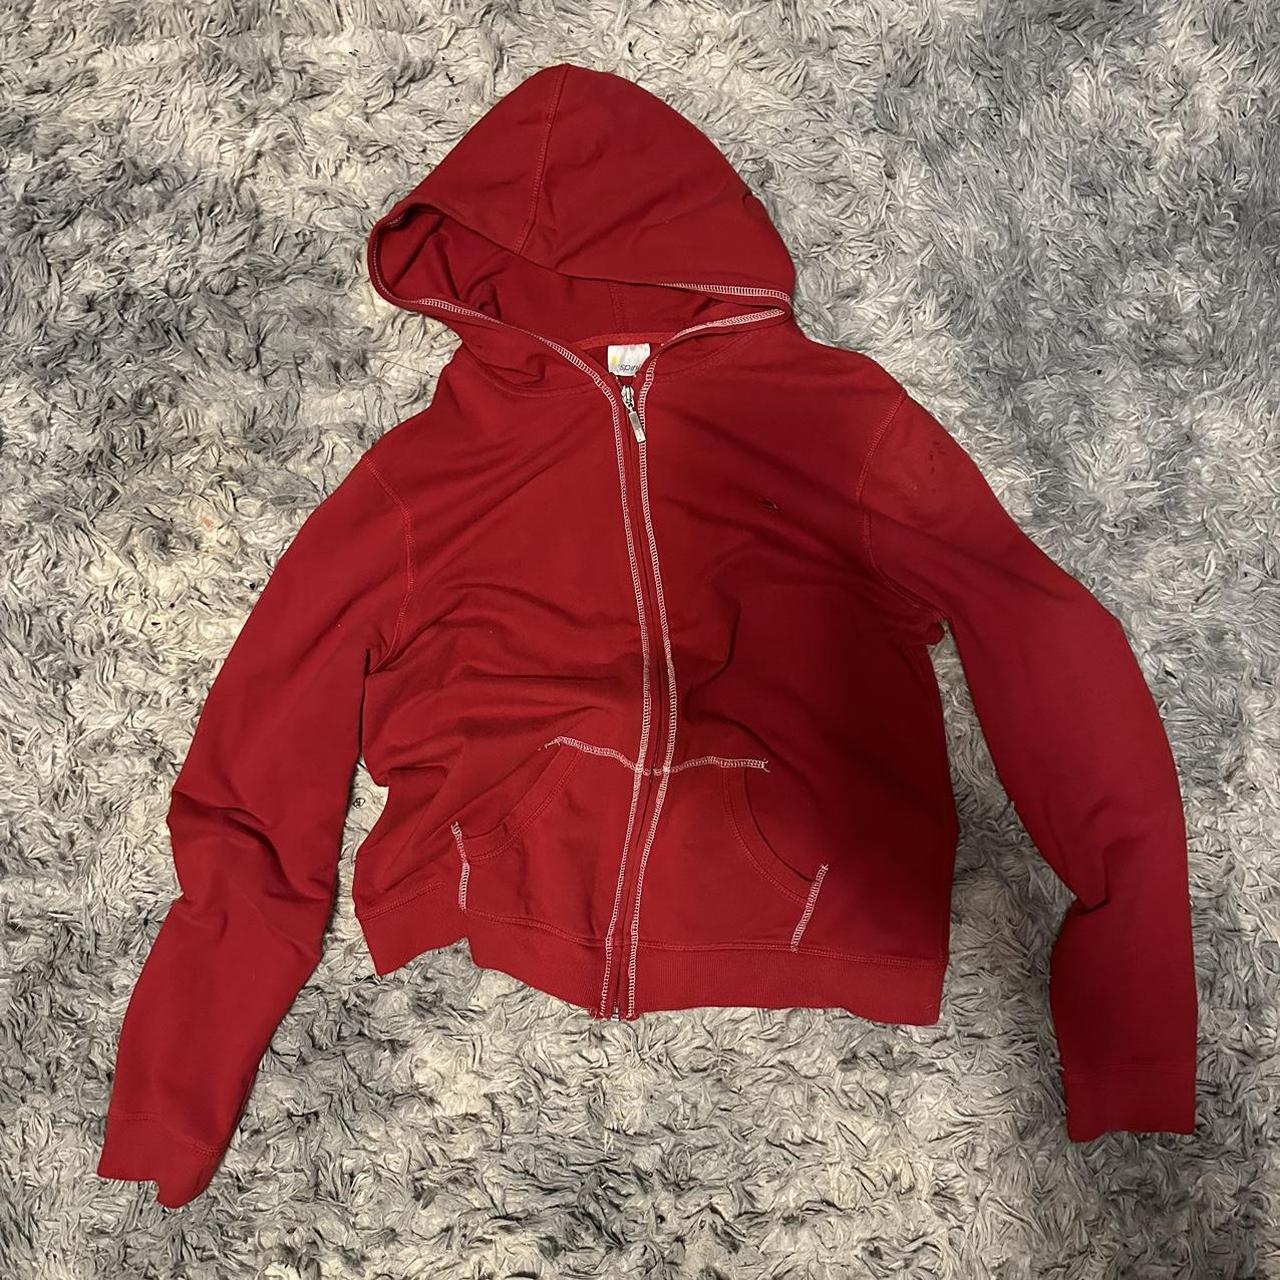 Red Thin Unisex hoodie white outline XS/S - Depop